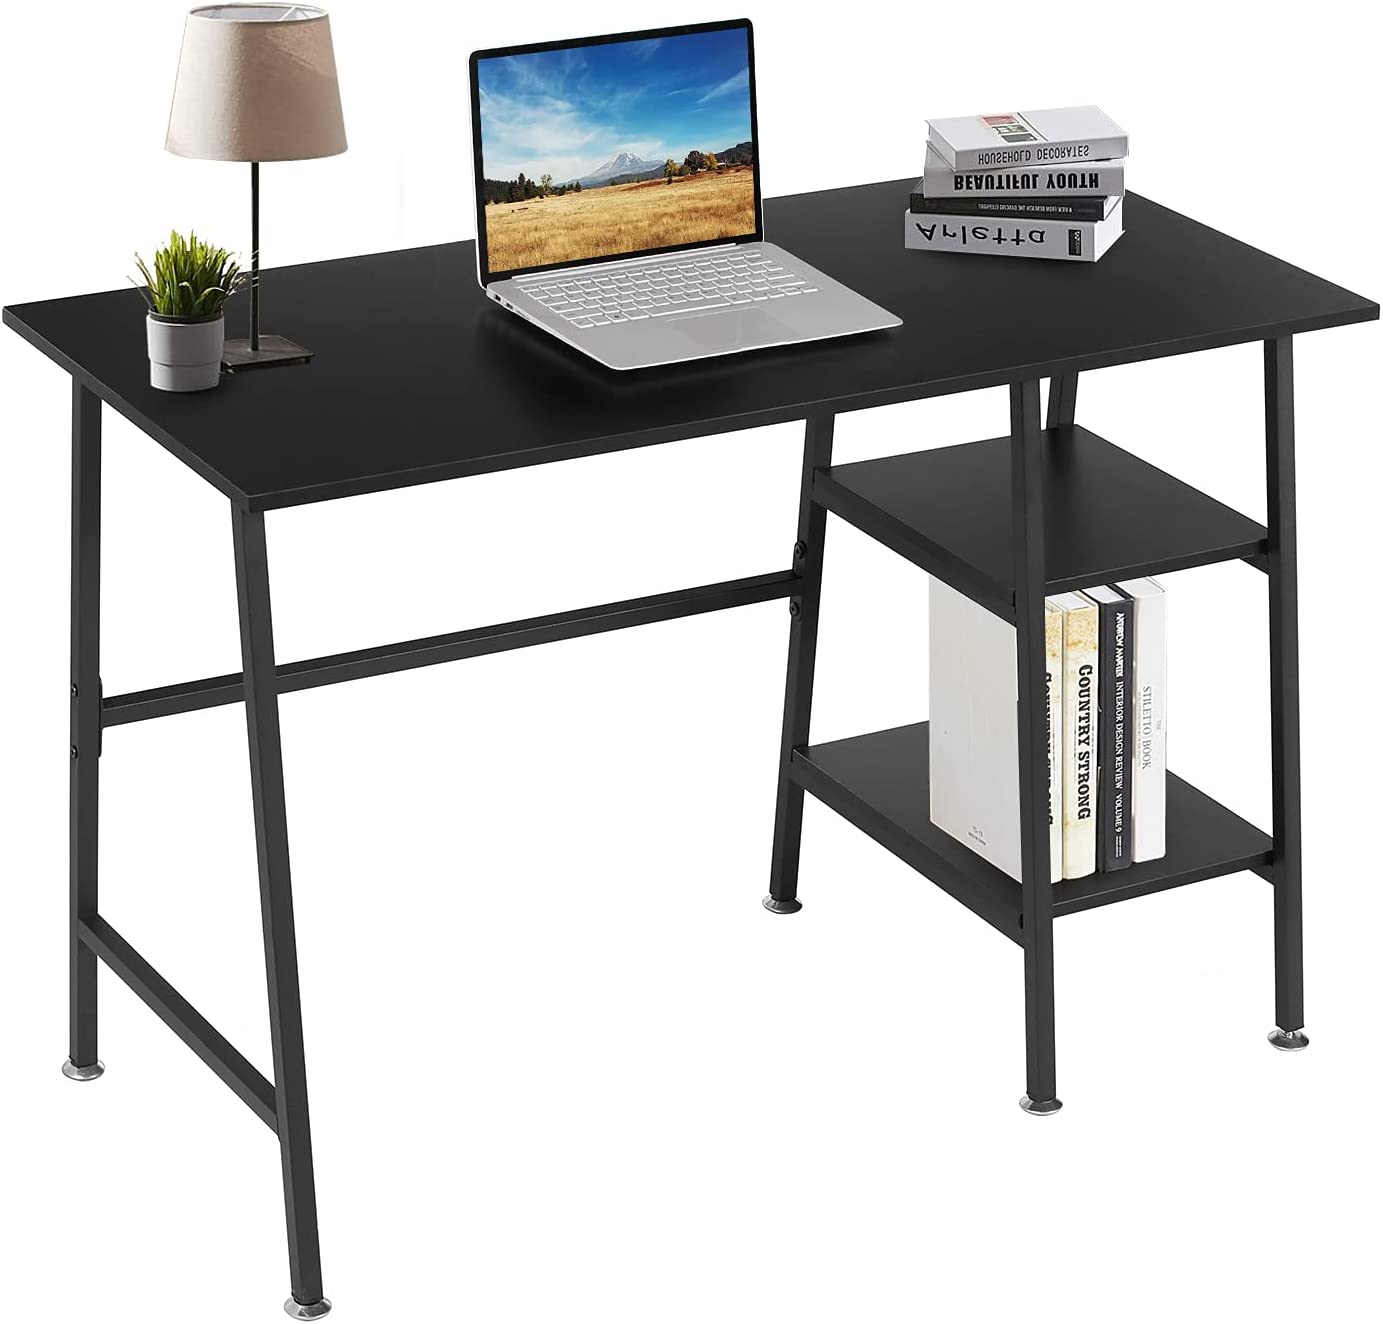 VECELO Computer Desk Study Writing Wooden Table with 2 Tier Storage Shelves on Left or Right for Home Office